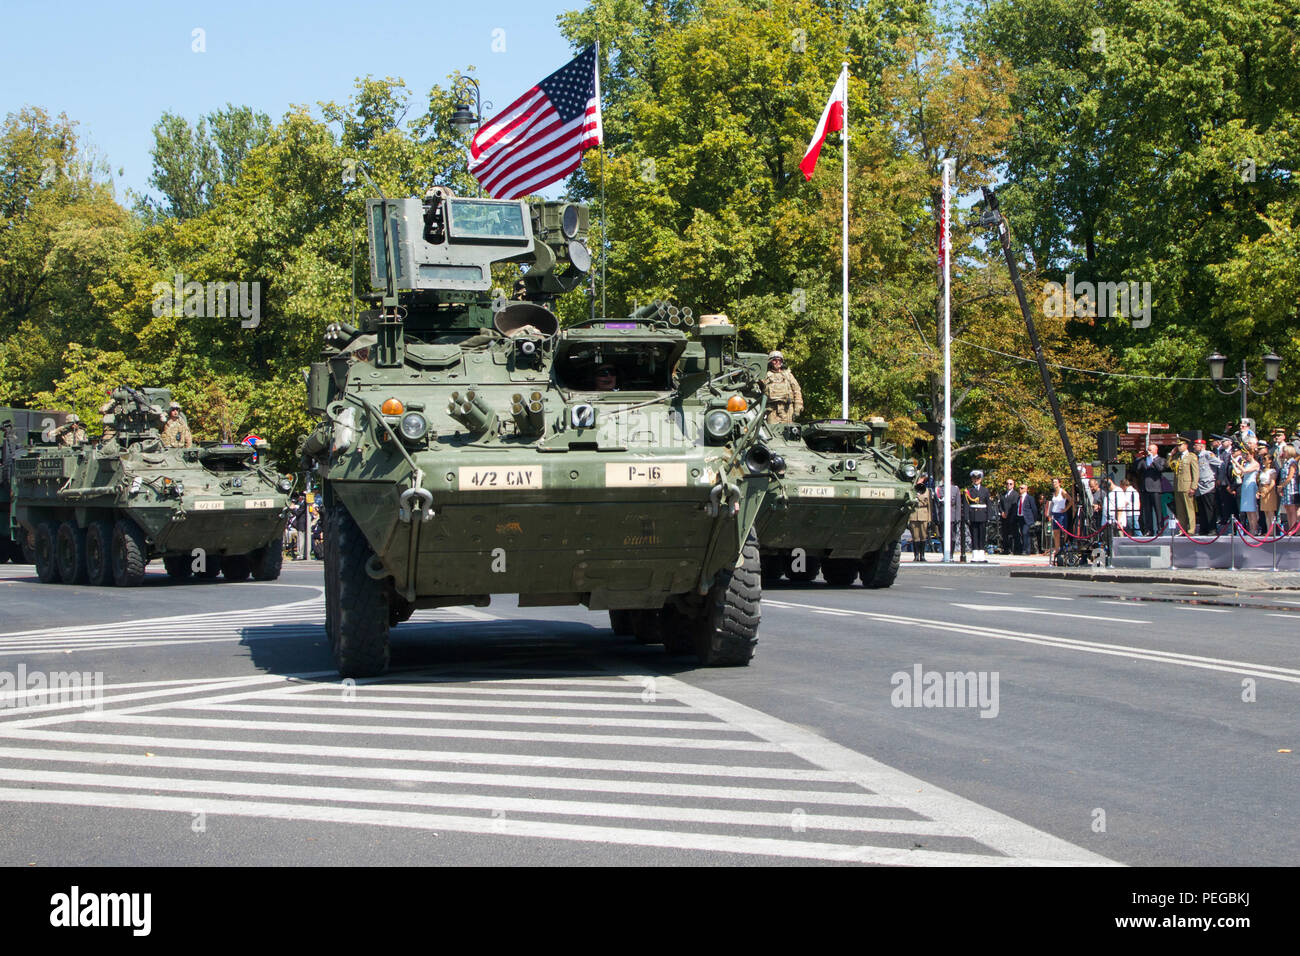 Soldiers with P Troop, 4th Squadron, 2nd Cavalry Regiment operate Stryker vehicles during a parade Aug. 15, 2015, in Warsaw, Poland. Armed Forces Day is a national holiday commemorating the 1920 victory over Soviet Russia at the Battle of Warsaw during the Polish-Soviet War. The training is part of Operation Atlantic Resolve, an ongoing multinational partnership focused on joint training and security cooperation between NATO allies. Led by the mission command element of the 4th Infantry Division and in conjunction with European partner nations, Atlantic Resolve is intended to improve combined  Stock Photo